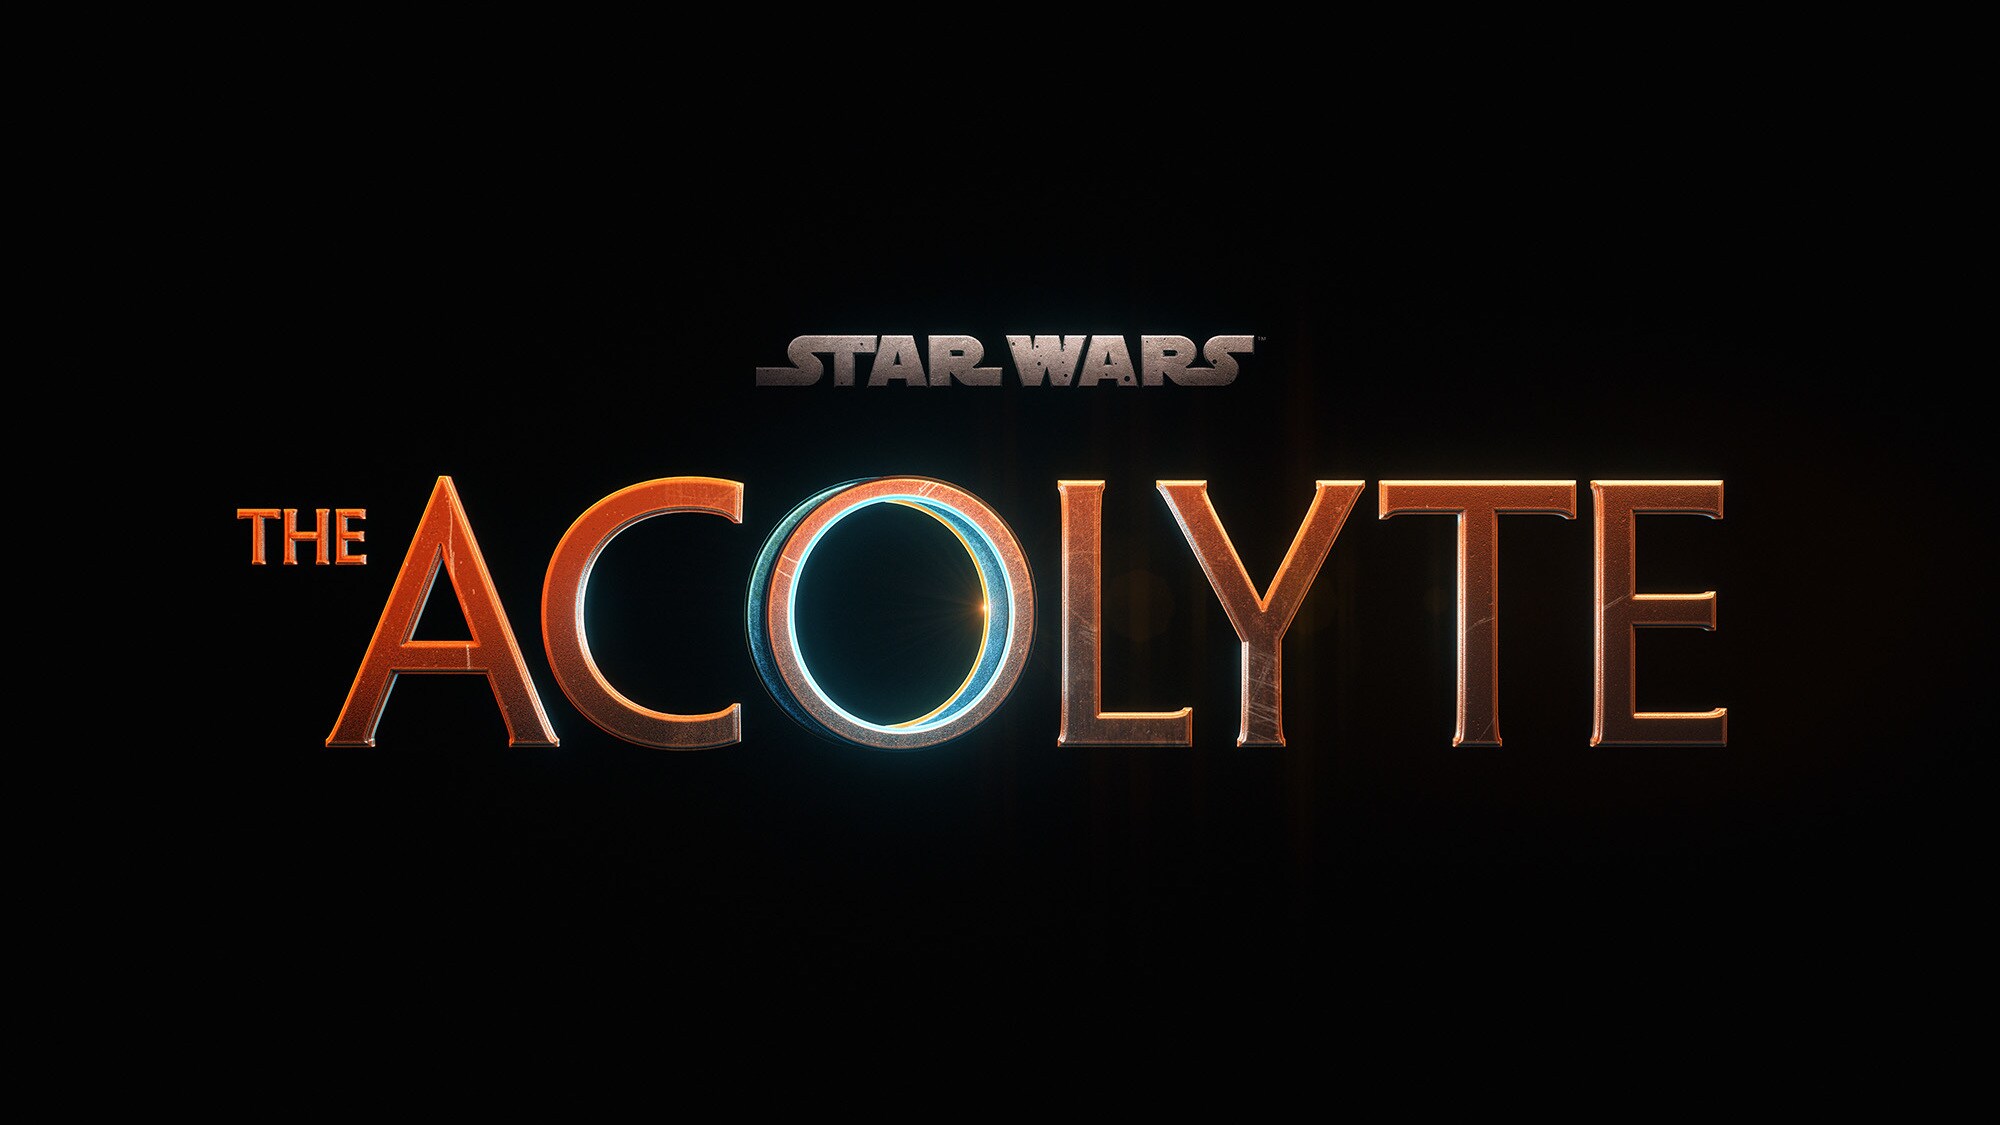 Disney+ Debuts First Trailer & Key Art for “Star Wars: The Acolyte”